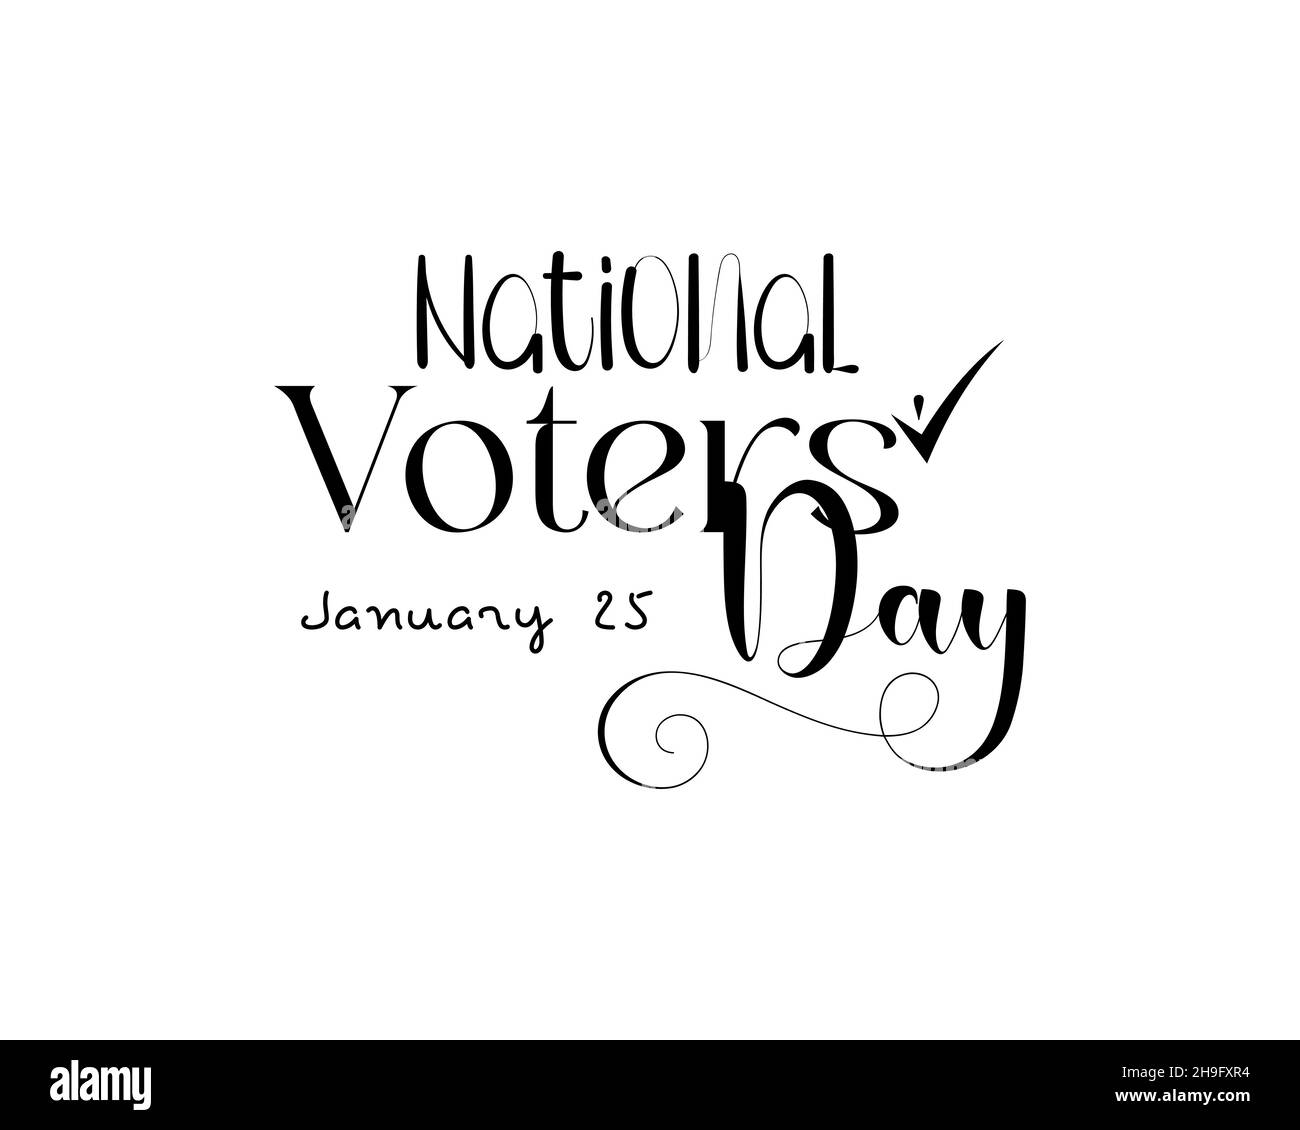 January 25 - Calligraphy style hand lettering design for National Voters Day. Creative illustration for banner, poster, tshirt, card. Stock Vector